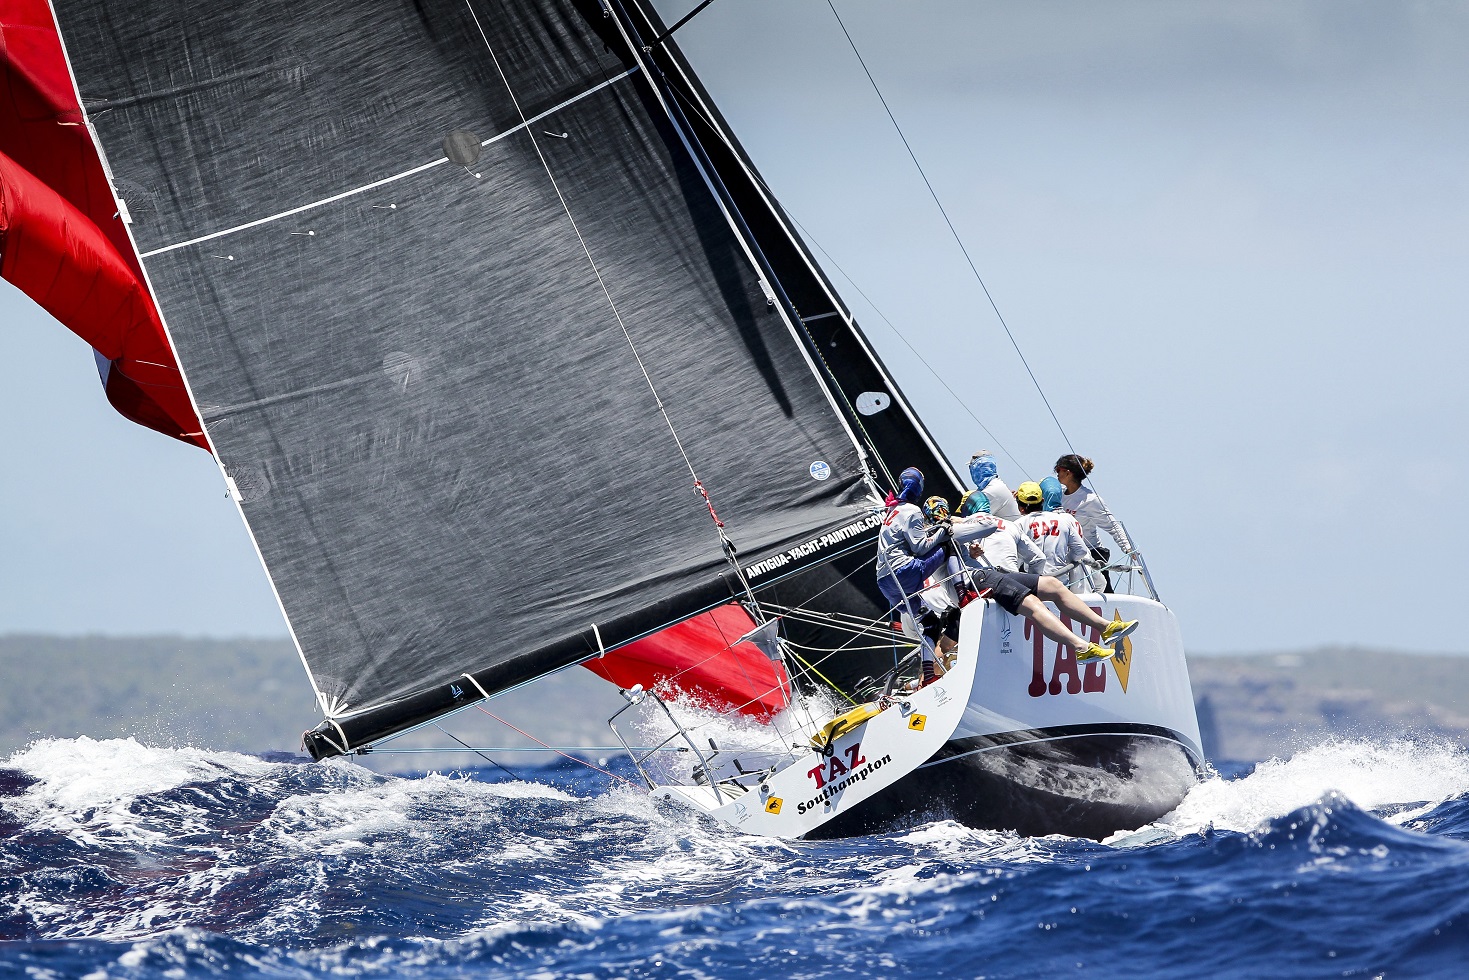 Bernie Evan-Wong has some 'secret weapons' on board his Antiguan carbon-flyer RP37 Taz in the form of seven promising 18-22 year-old sailors © Paul Wyeth